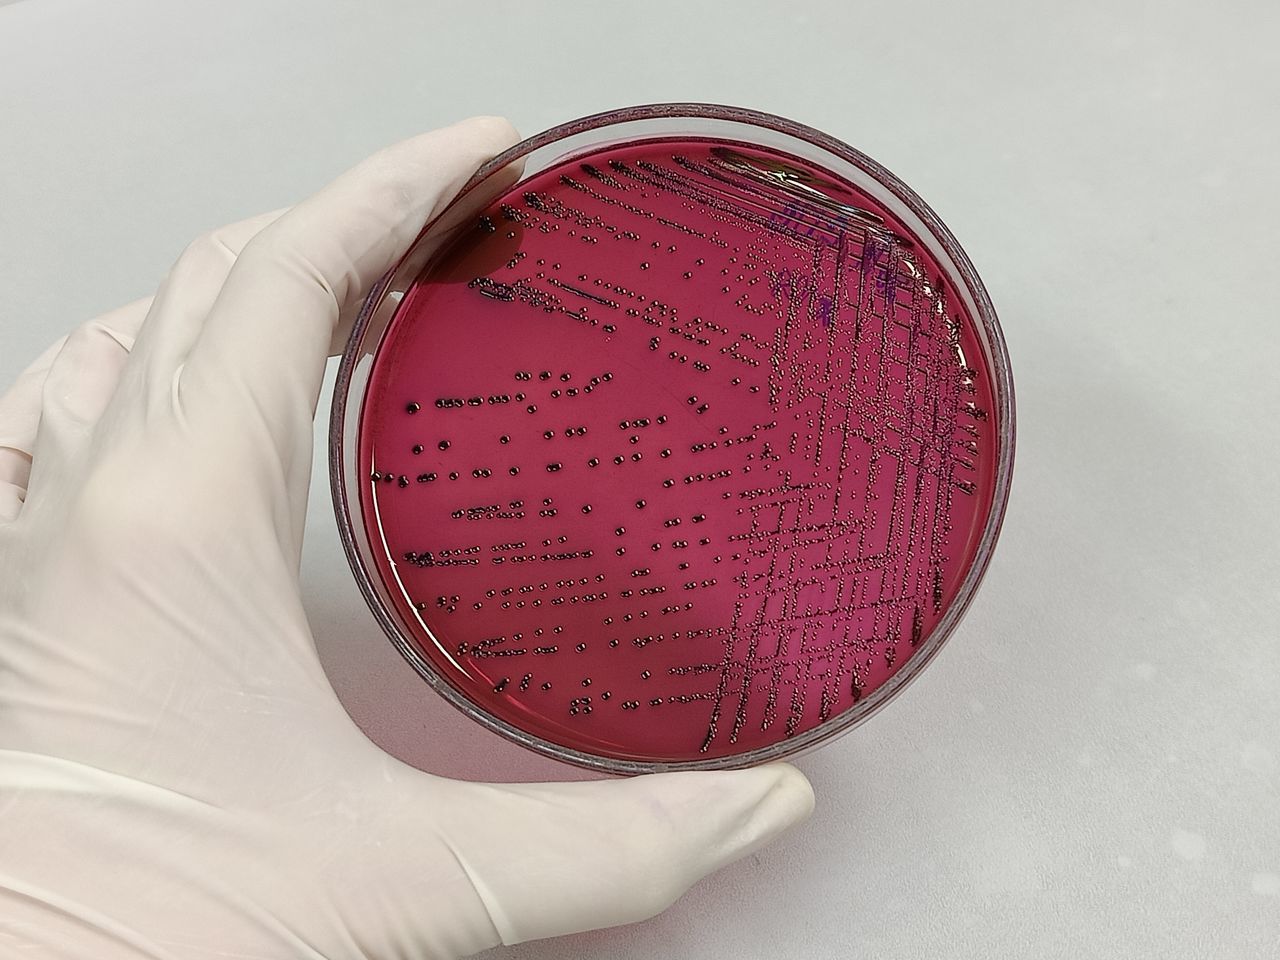 pink, red, science, research, laboratory, scientific experiment, biology, lip, indoors, one person, medical research, education, biochemistry, healthcare and medicine, petri dish, holding, hand, microbiology, human eye, close-up, protection, studio shot, biotechnology